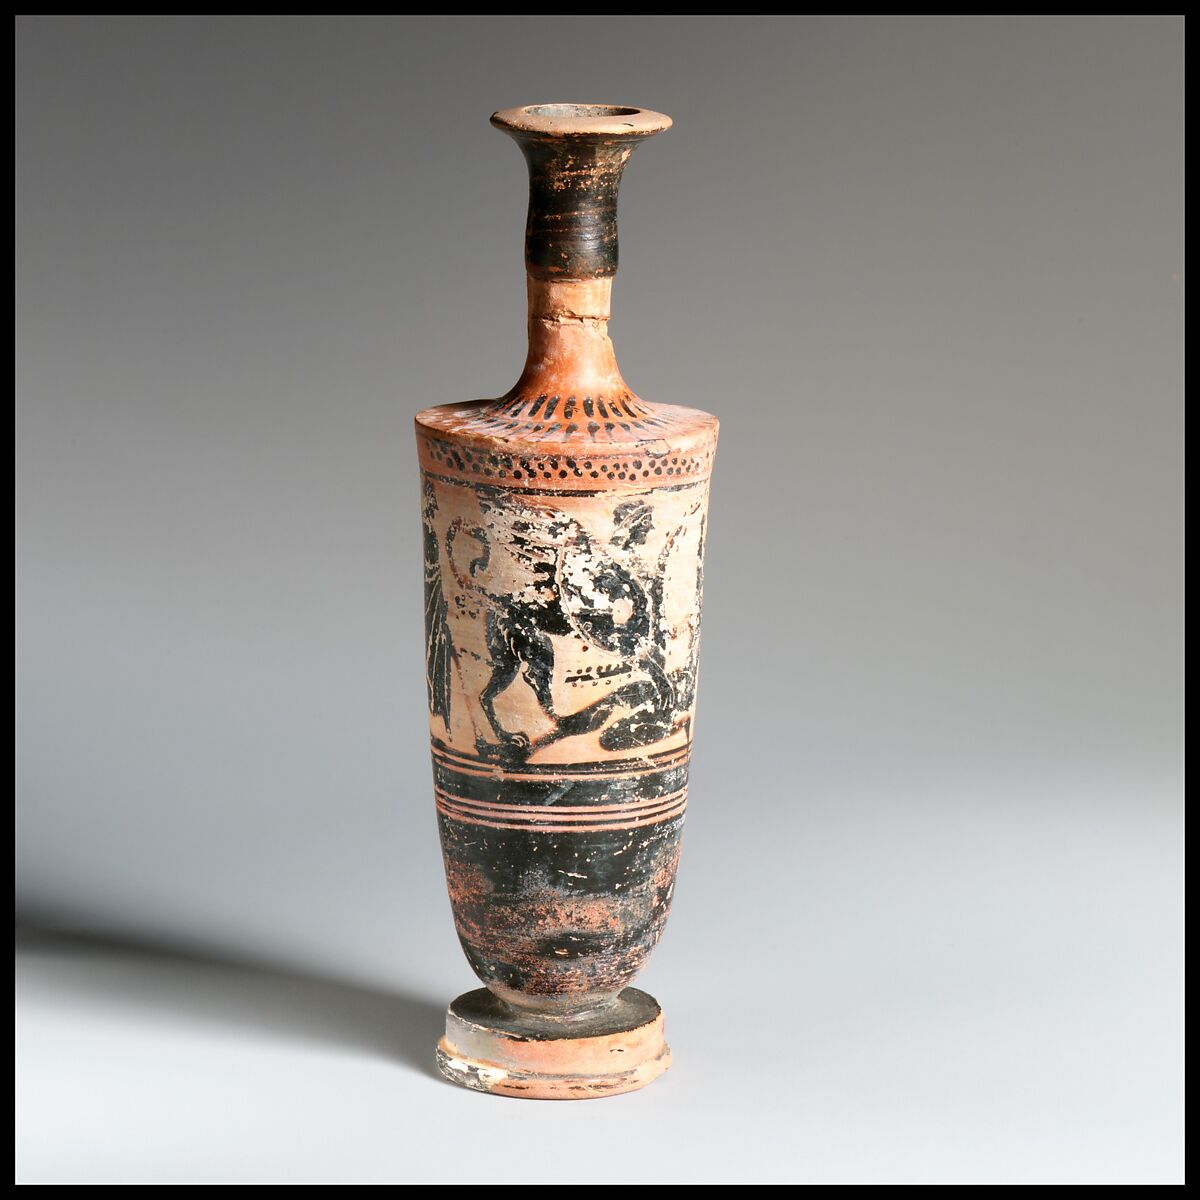 Terracotta lekythos (oil flask), Attributed to the Emporion Painter, Terracotta, Greek, Attic 